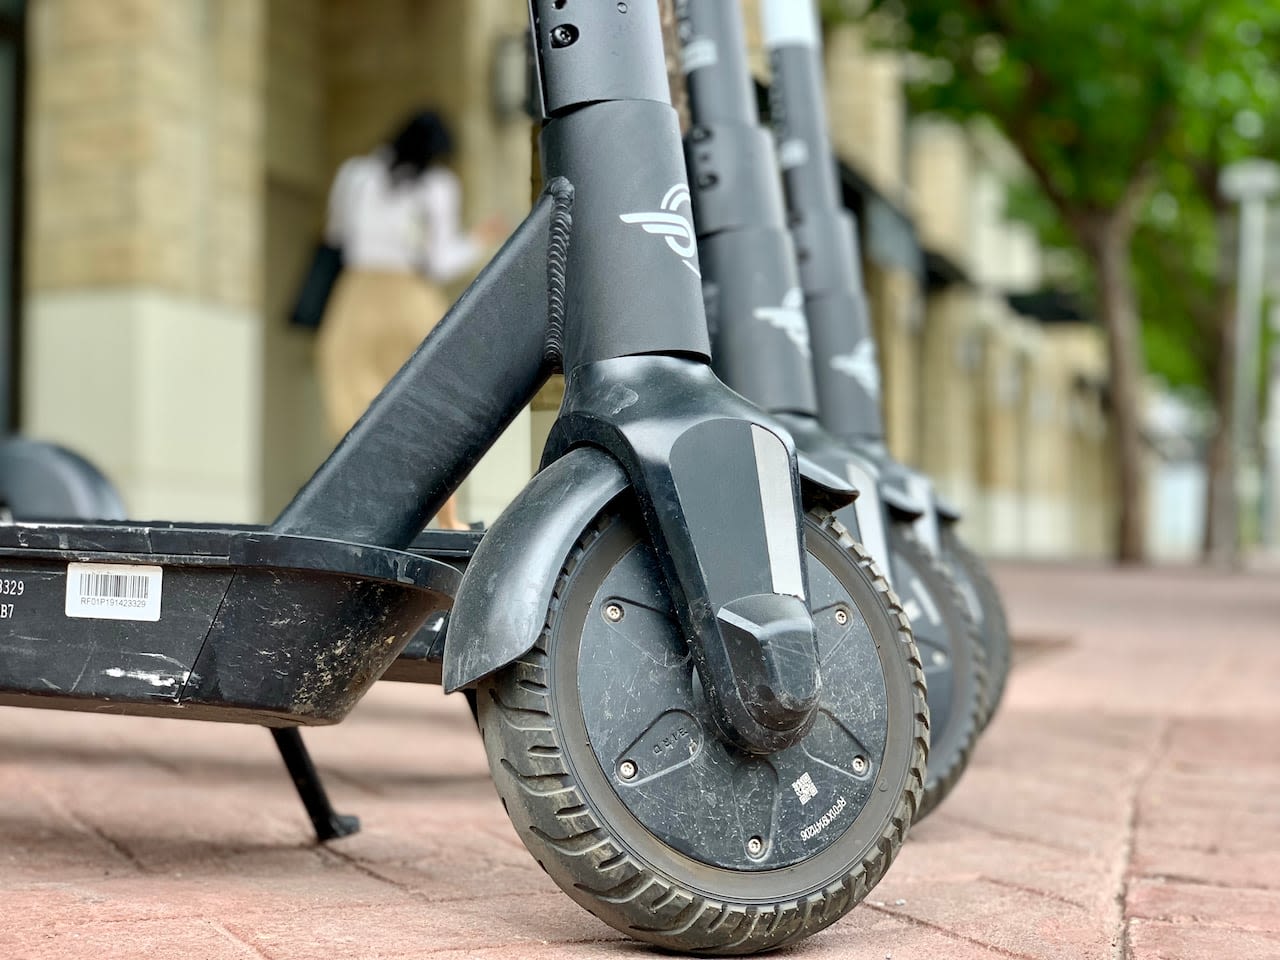 Toronto councillors frustrated with lack of e-scooter enforcement